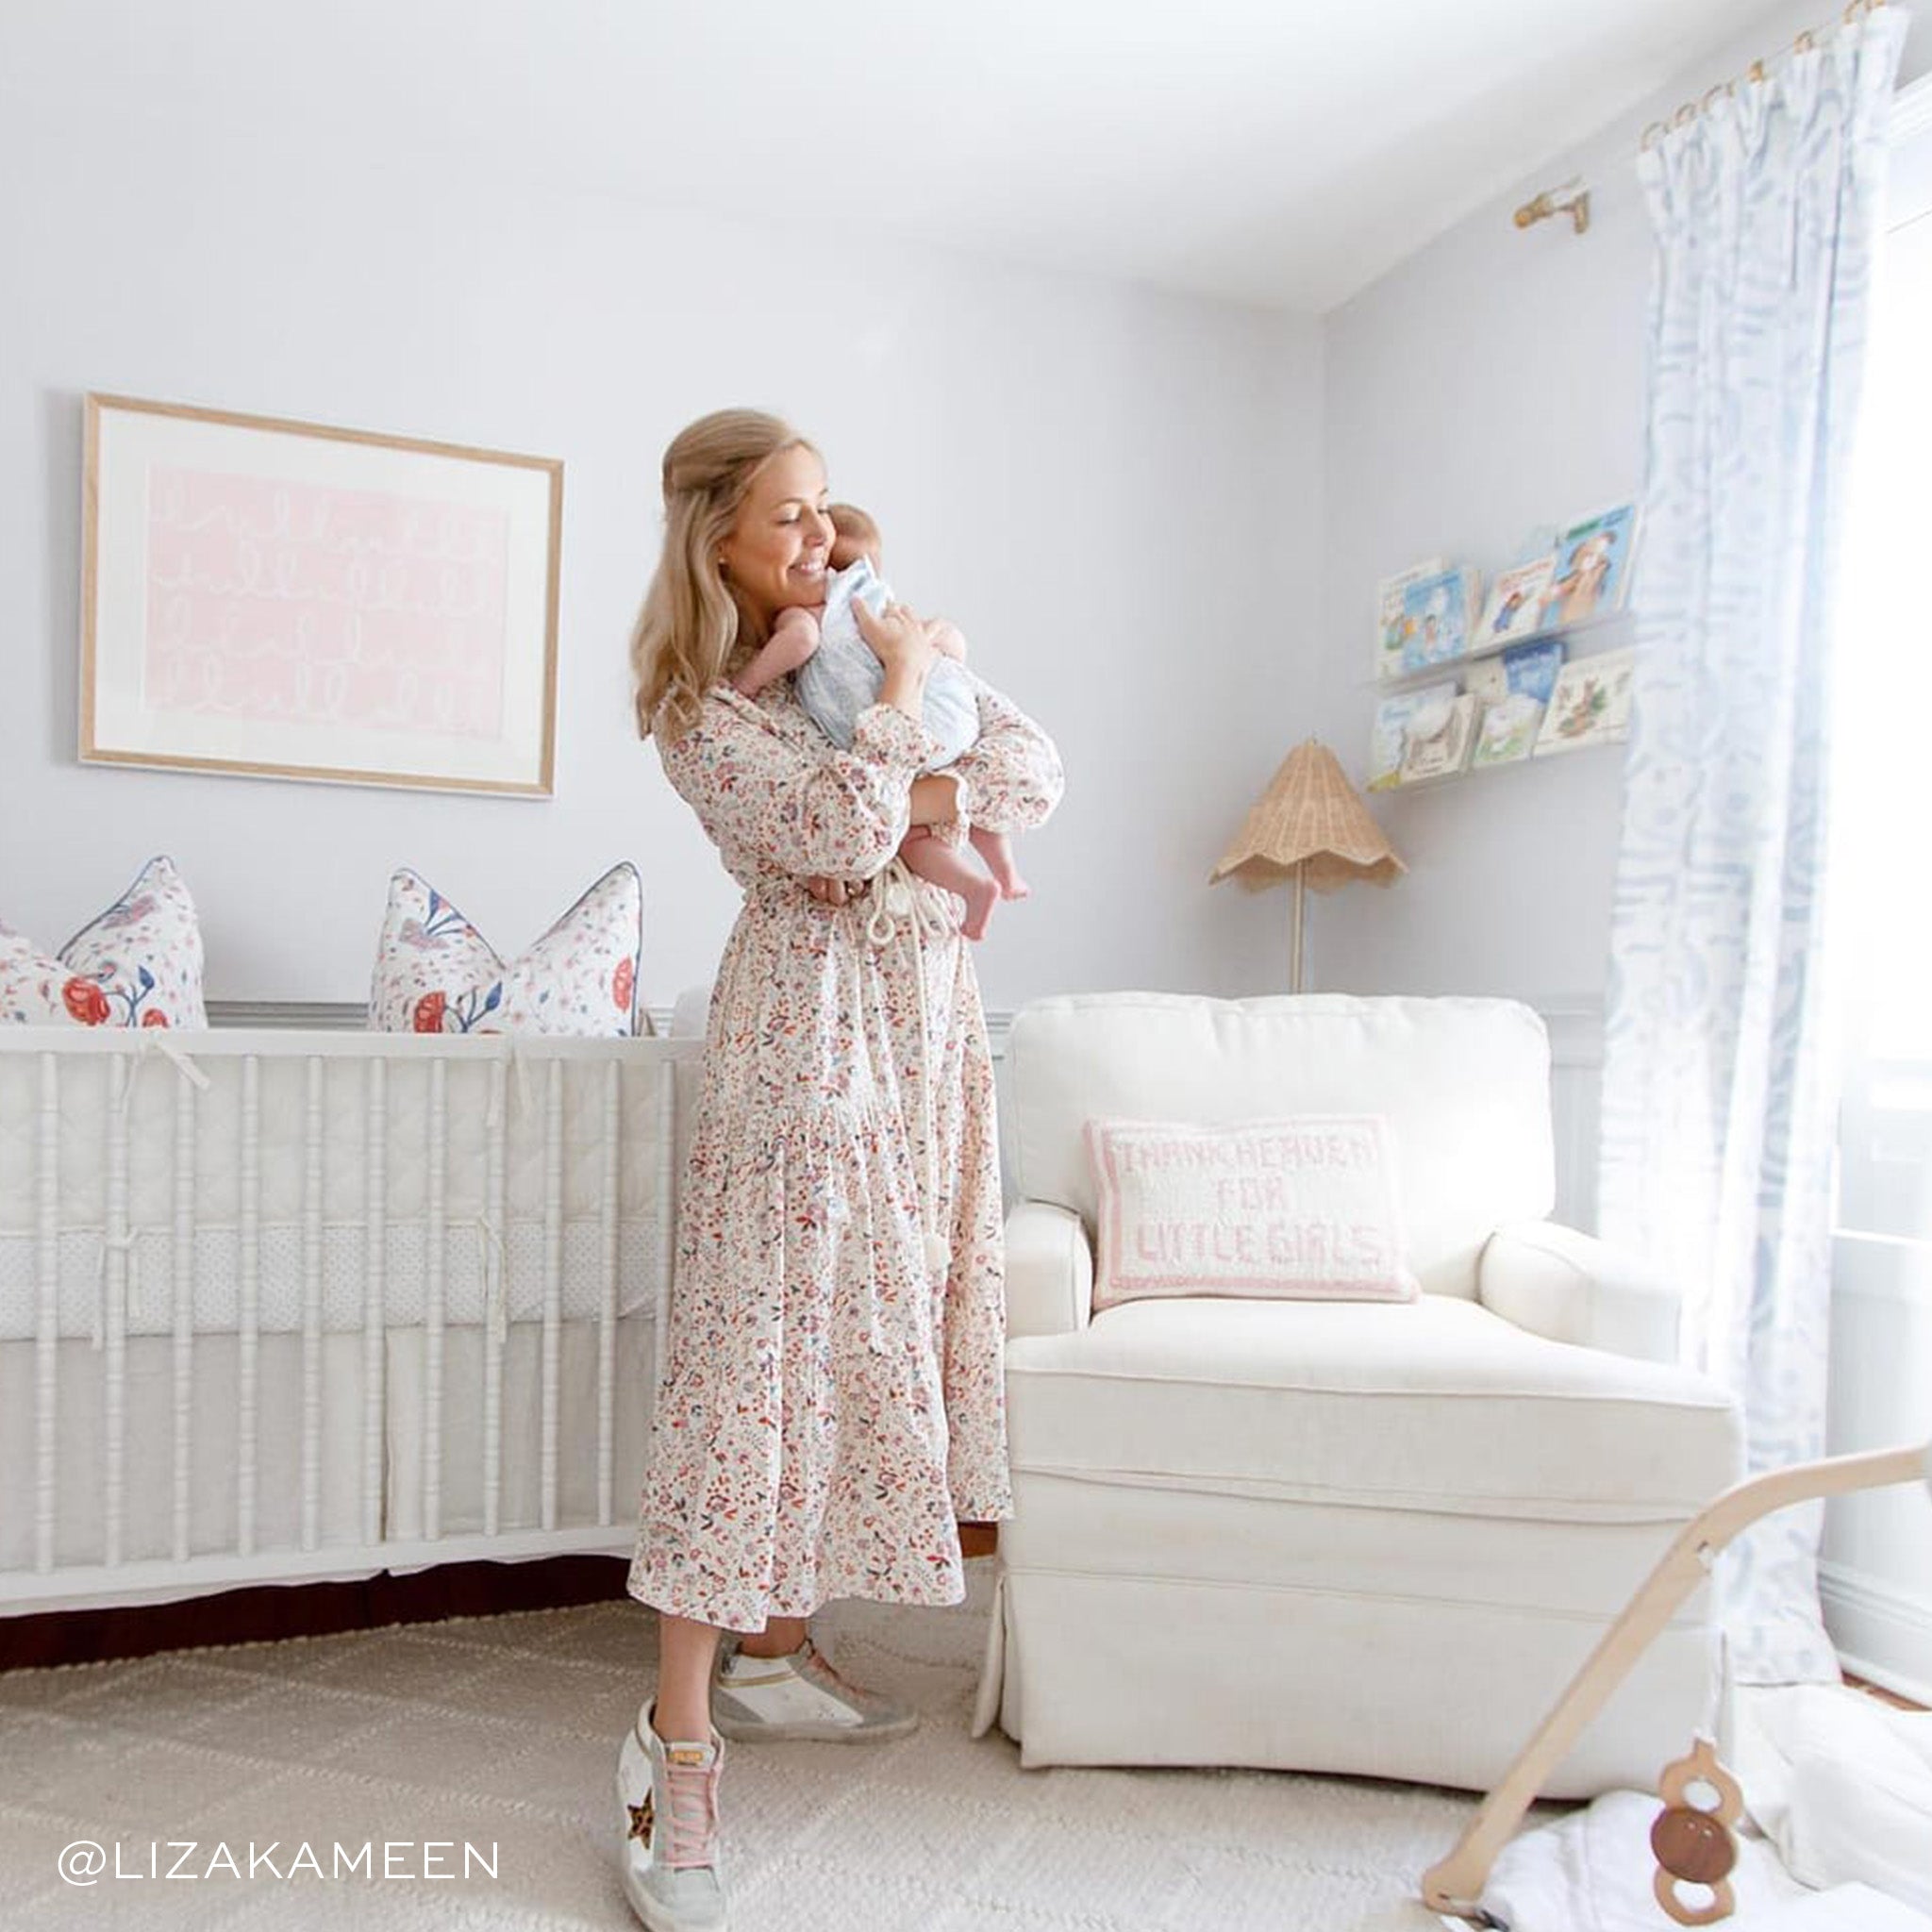 Nursery room with mother wearing floral white dress carrying baby in between a white crib and white couch next to an illuminated window styled with Sky Blue Printed Curtains. Photo taken by Liza Kameen